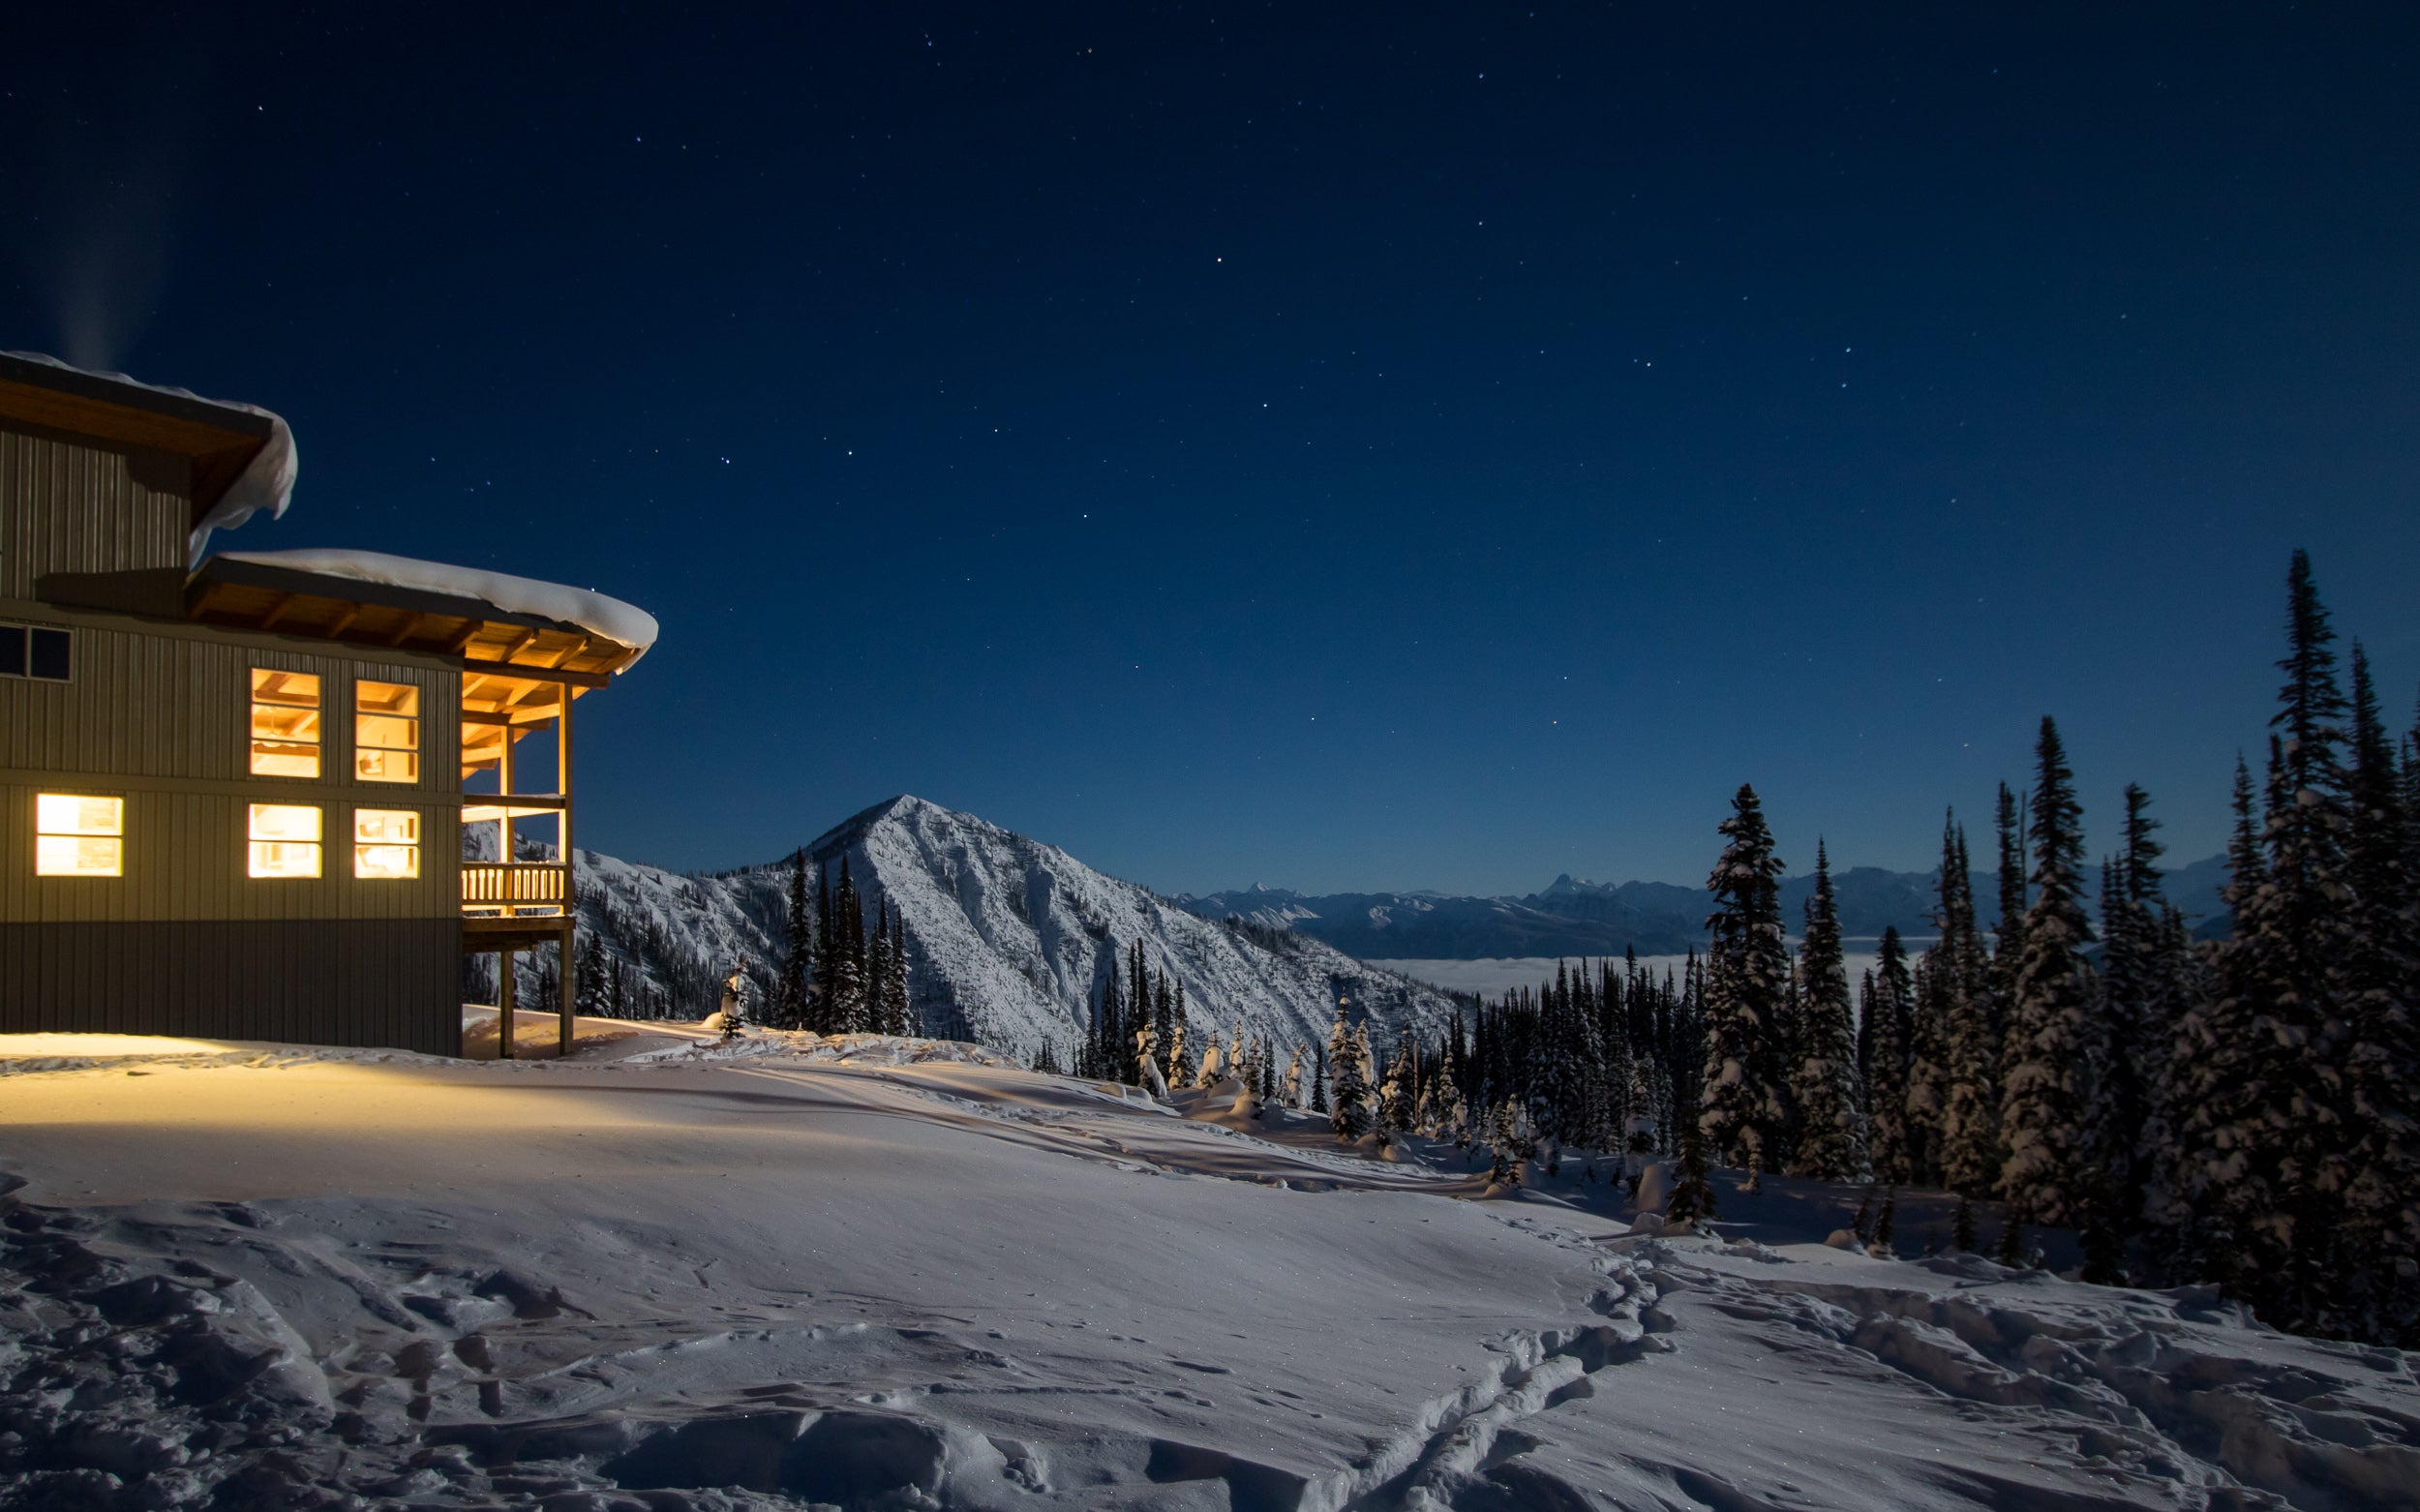 A starry night at the Sentry Lodge backcountry ski lodge in British Columbia. Ski Lodge photo by Evan Peters